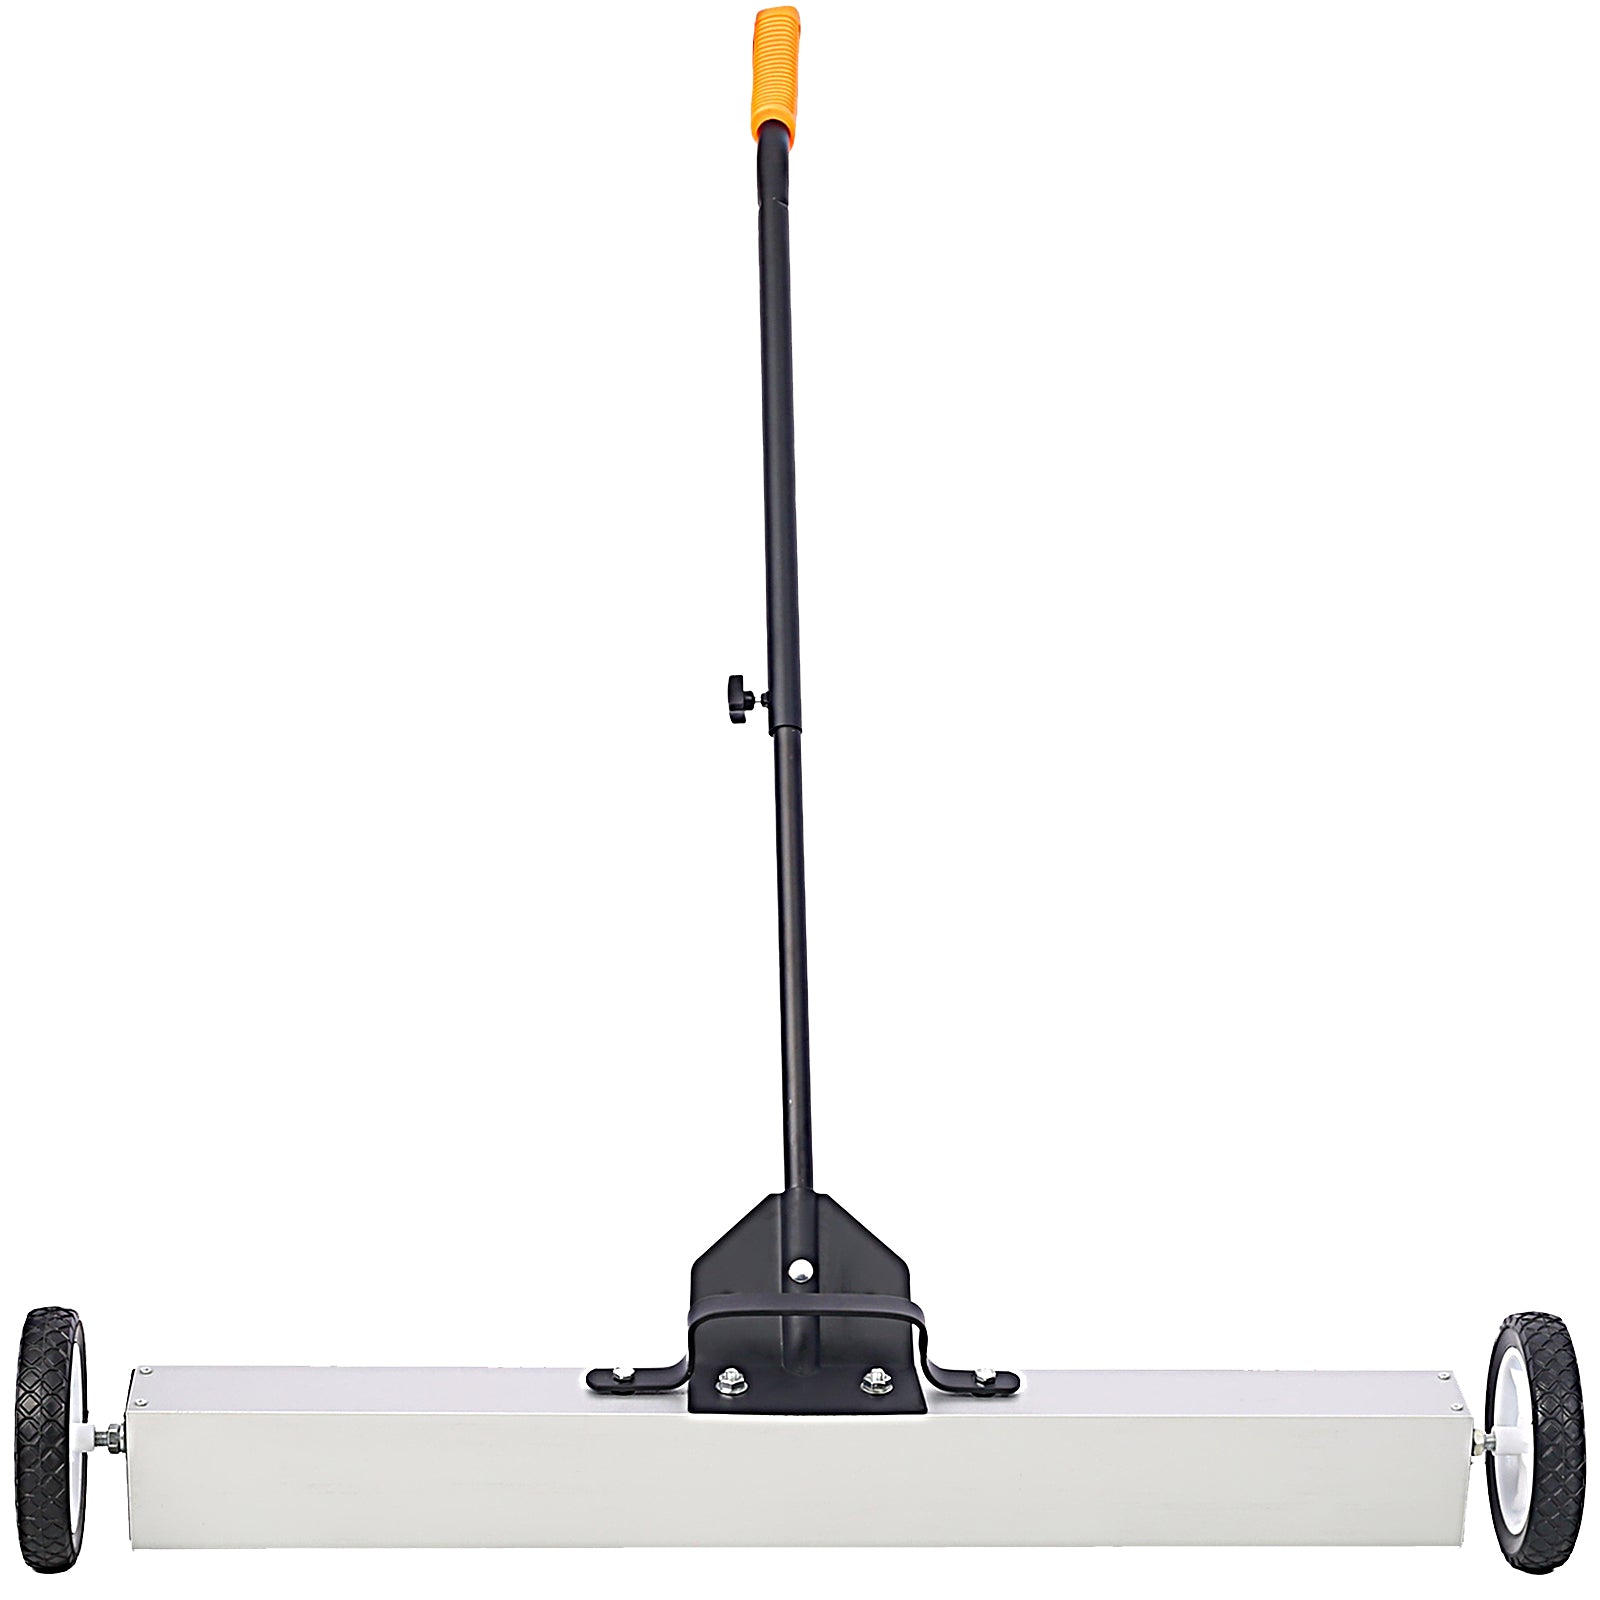 ZNTS 36" Rolling Magnetic Pick-Up Sweeper, Heavy Duty Push-Type with Release, for Nails Needles Screws W46577098